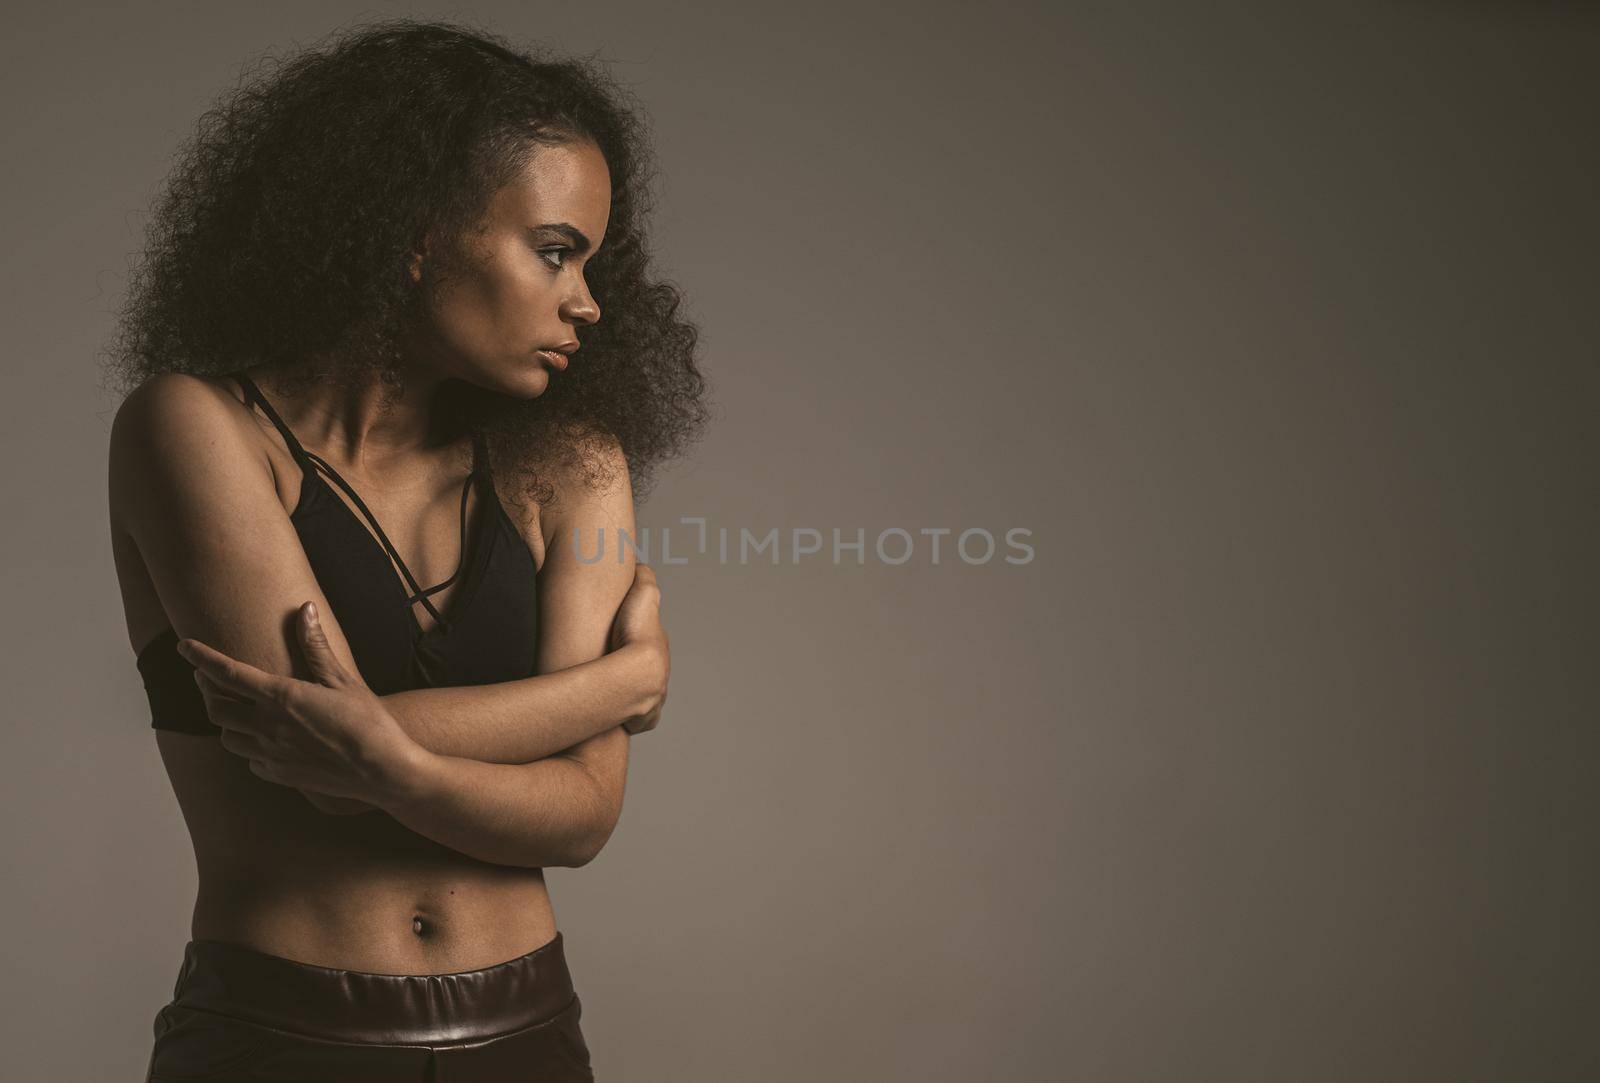 Timidity, panic attack, self-preservation, fear African American girl standing covered with hands in black bare shoulder top isolated on grey background. Human emotions, facial expression concept.